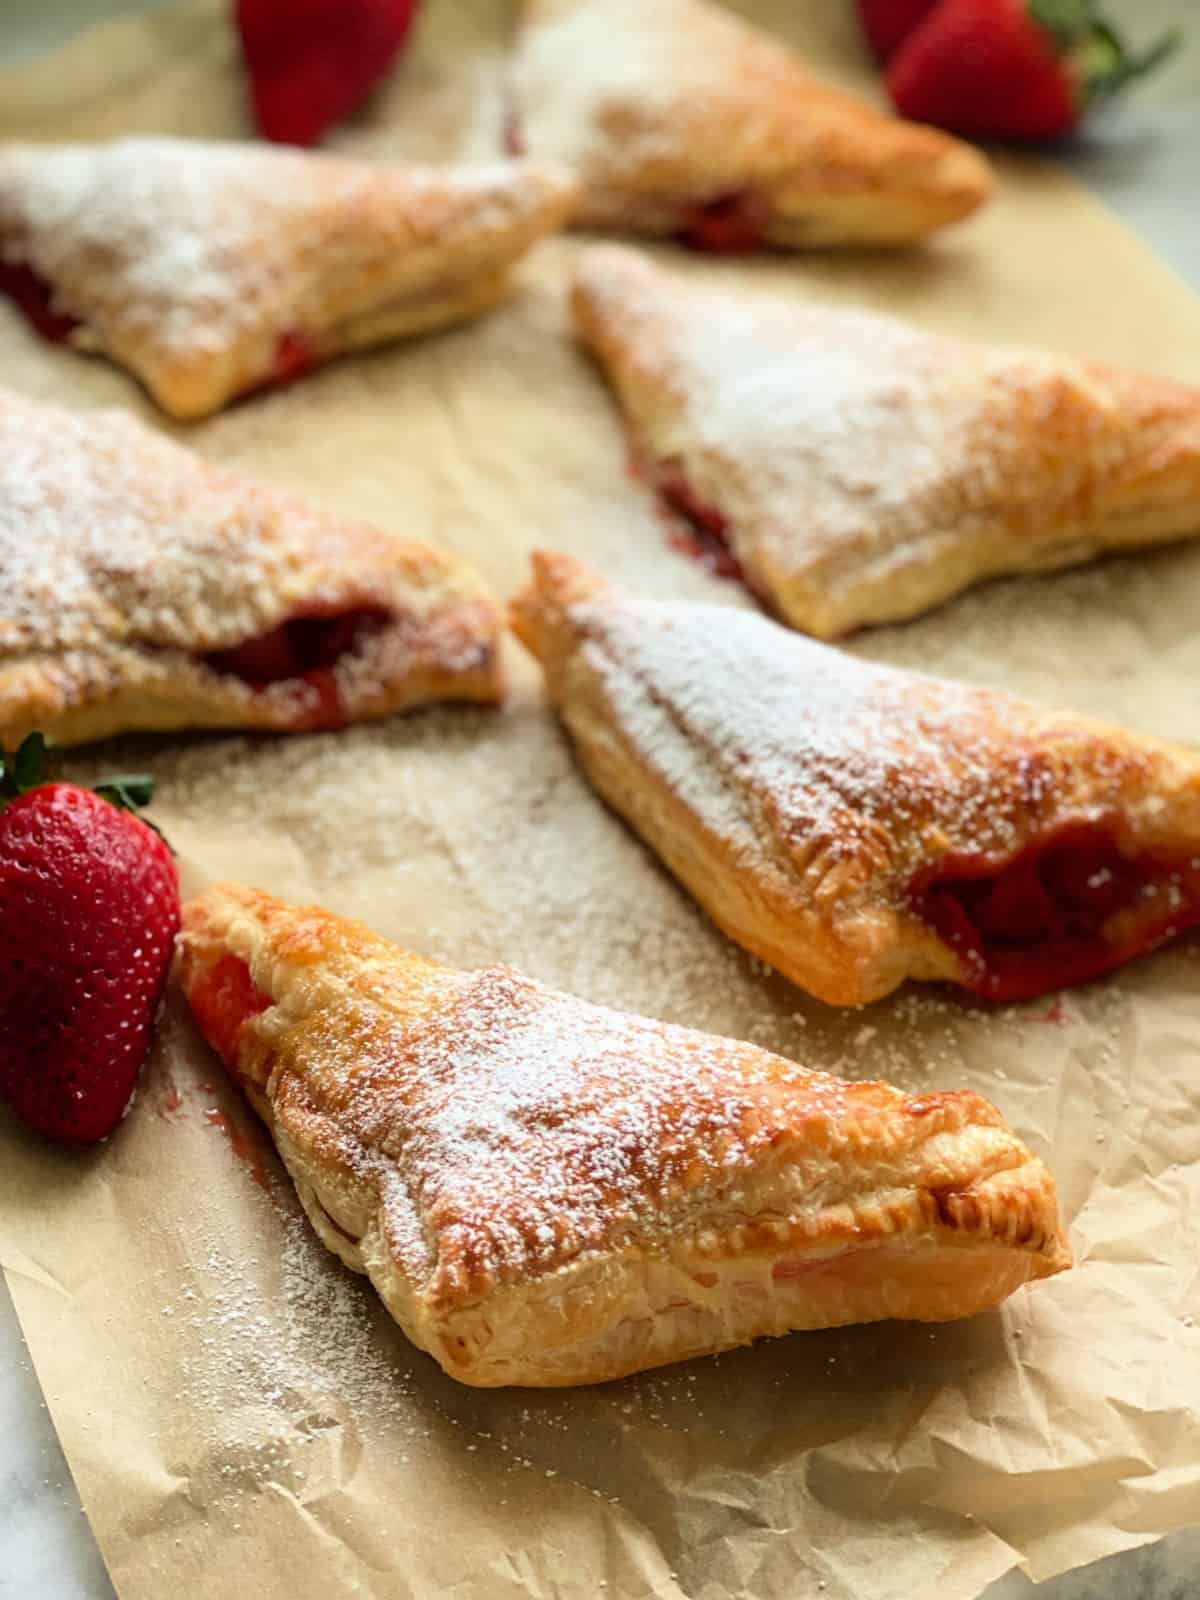 6 triangle turnovers with confectioners' sugar with strawberries on the side.